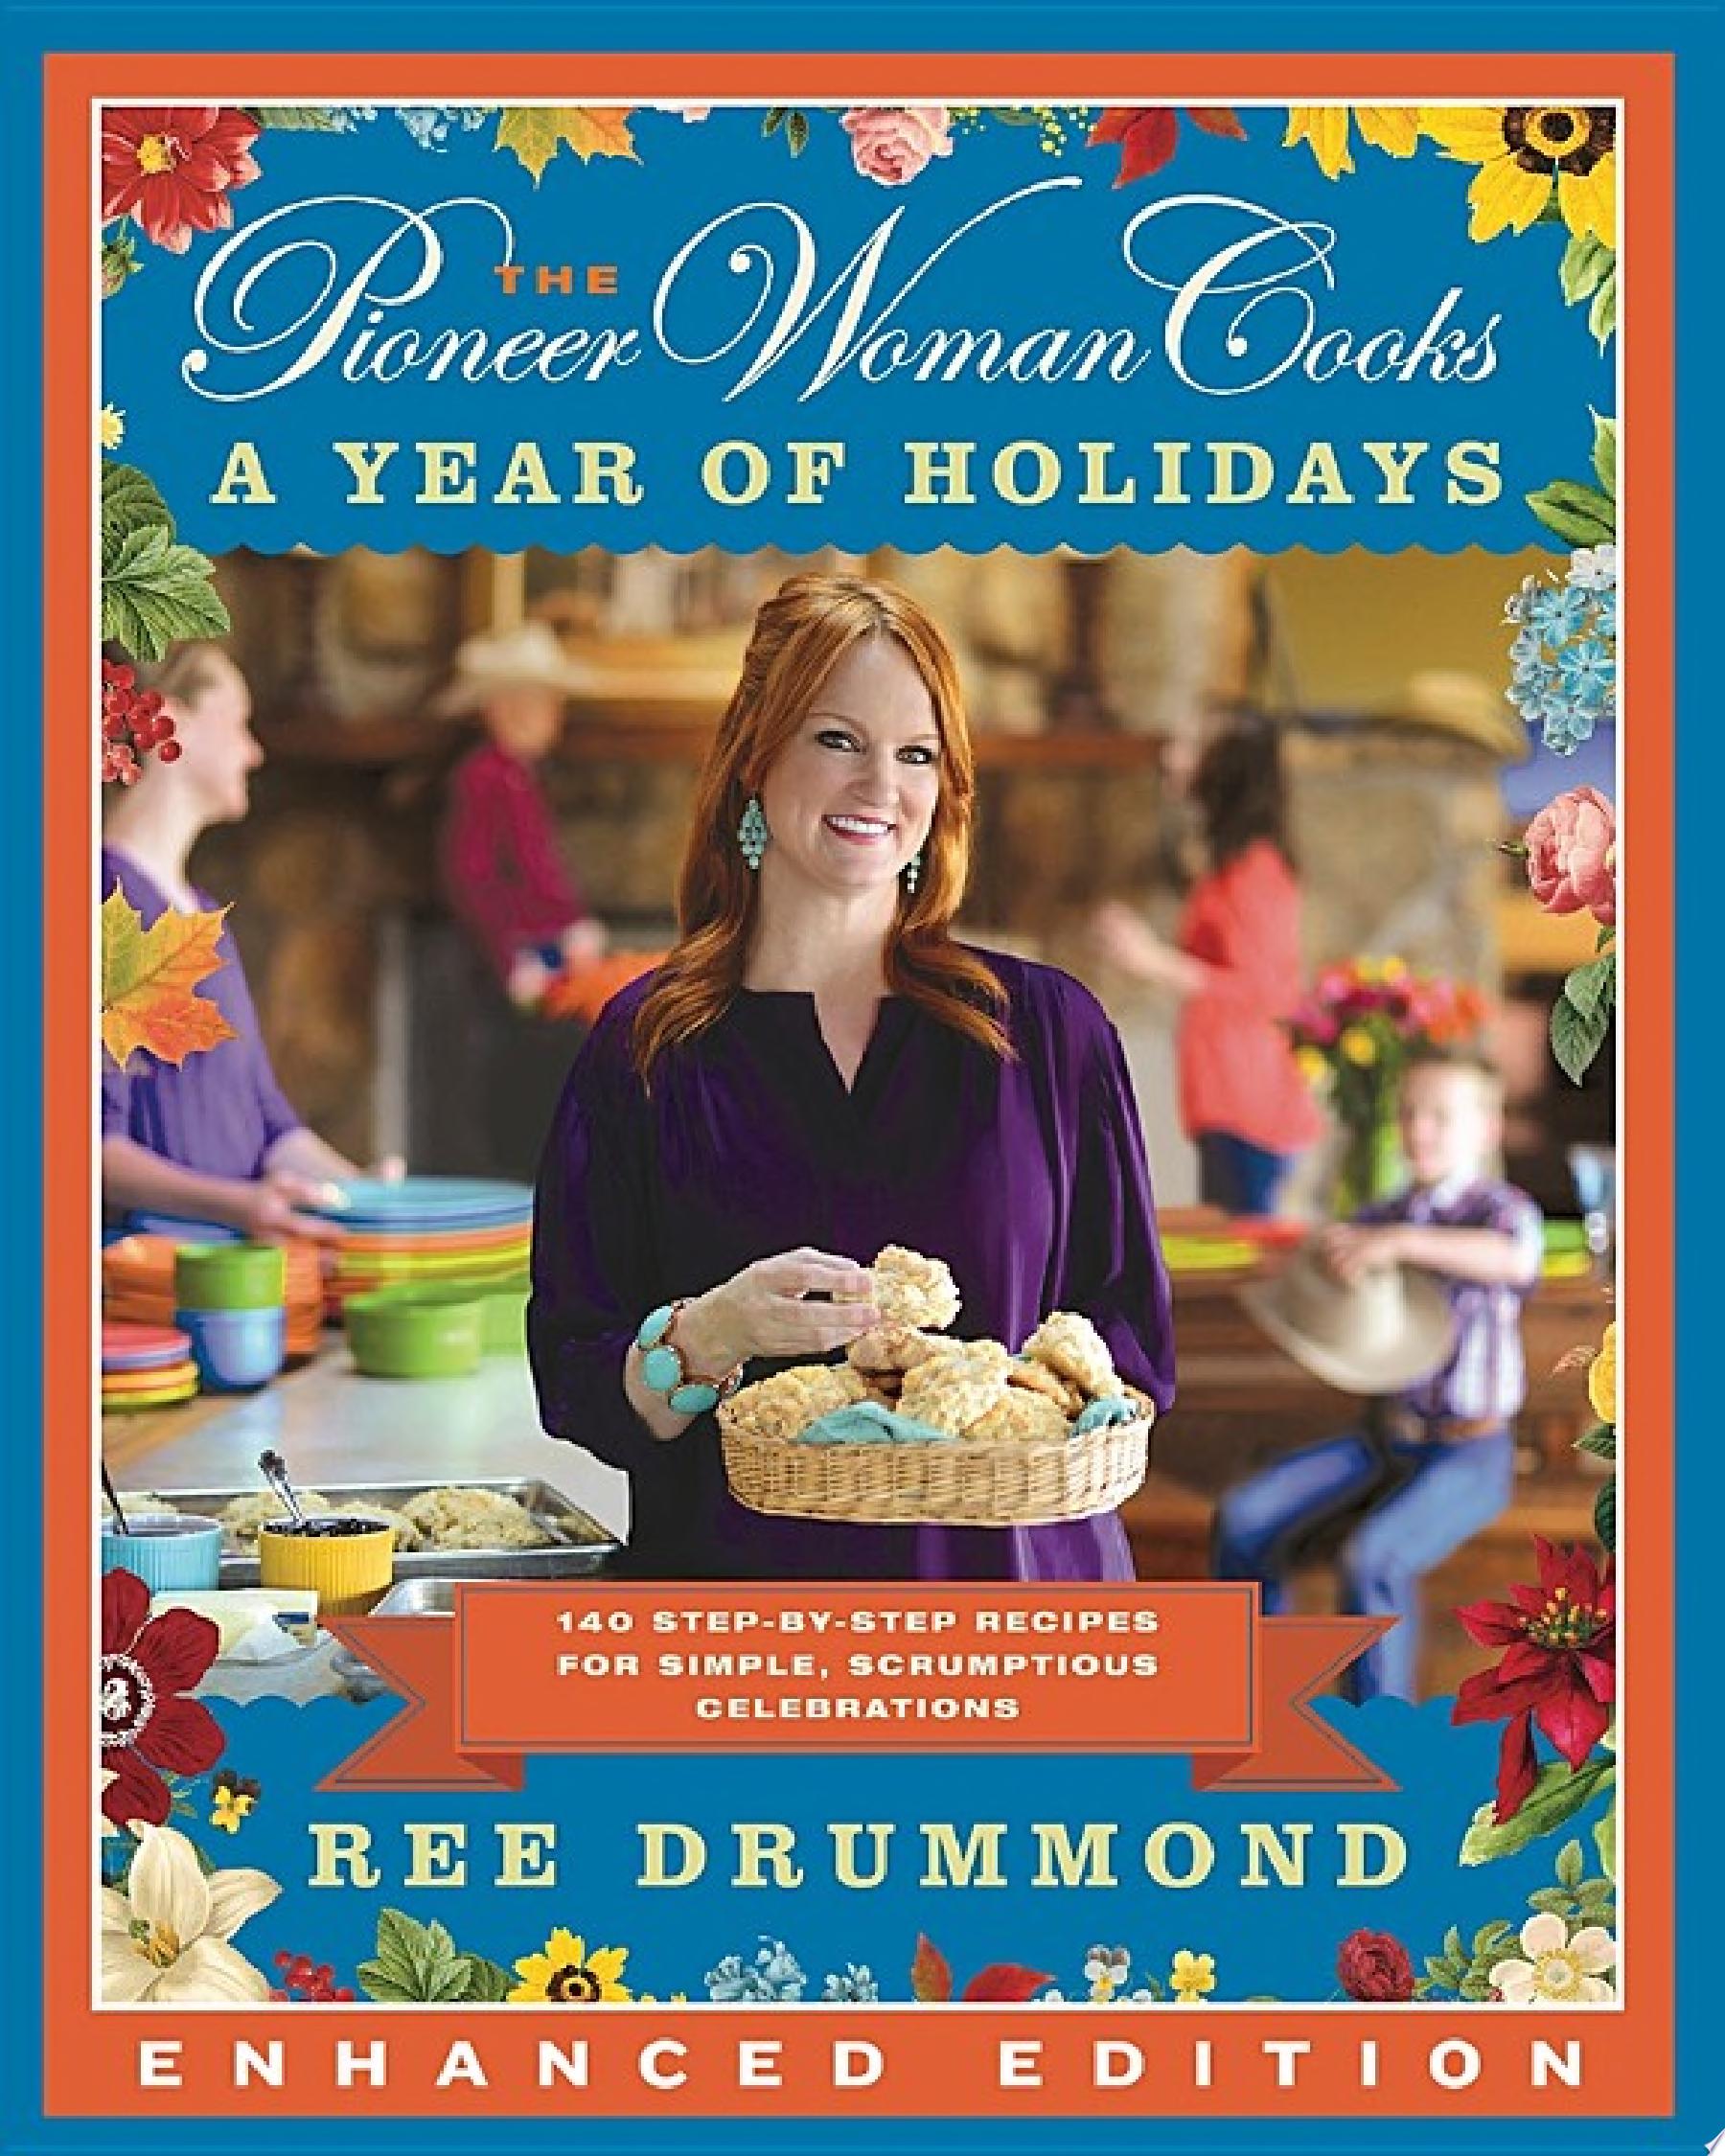 Image for "The Pioneer Woman Cooks: A Year of Holidays (Enhanced Edition)"